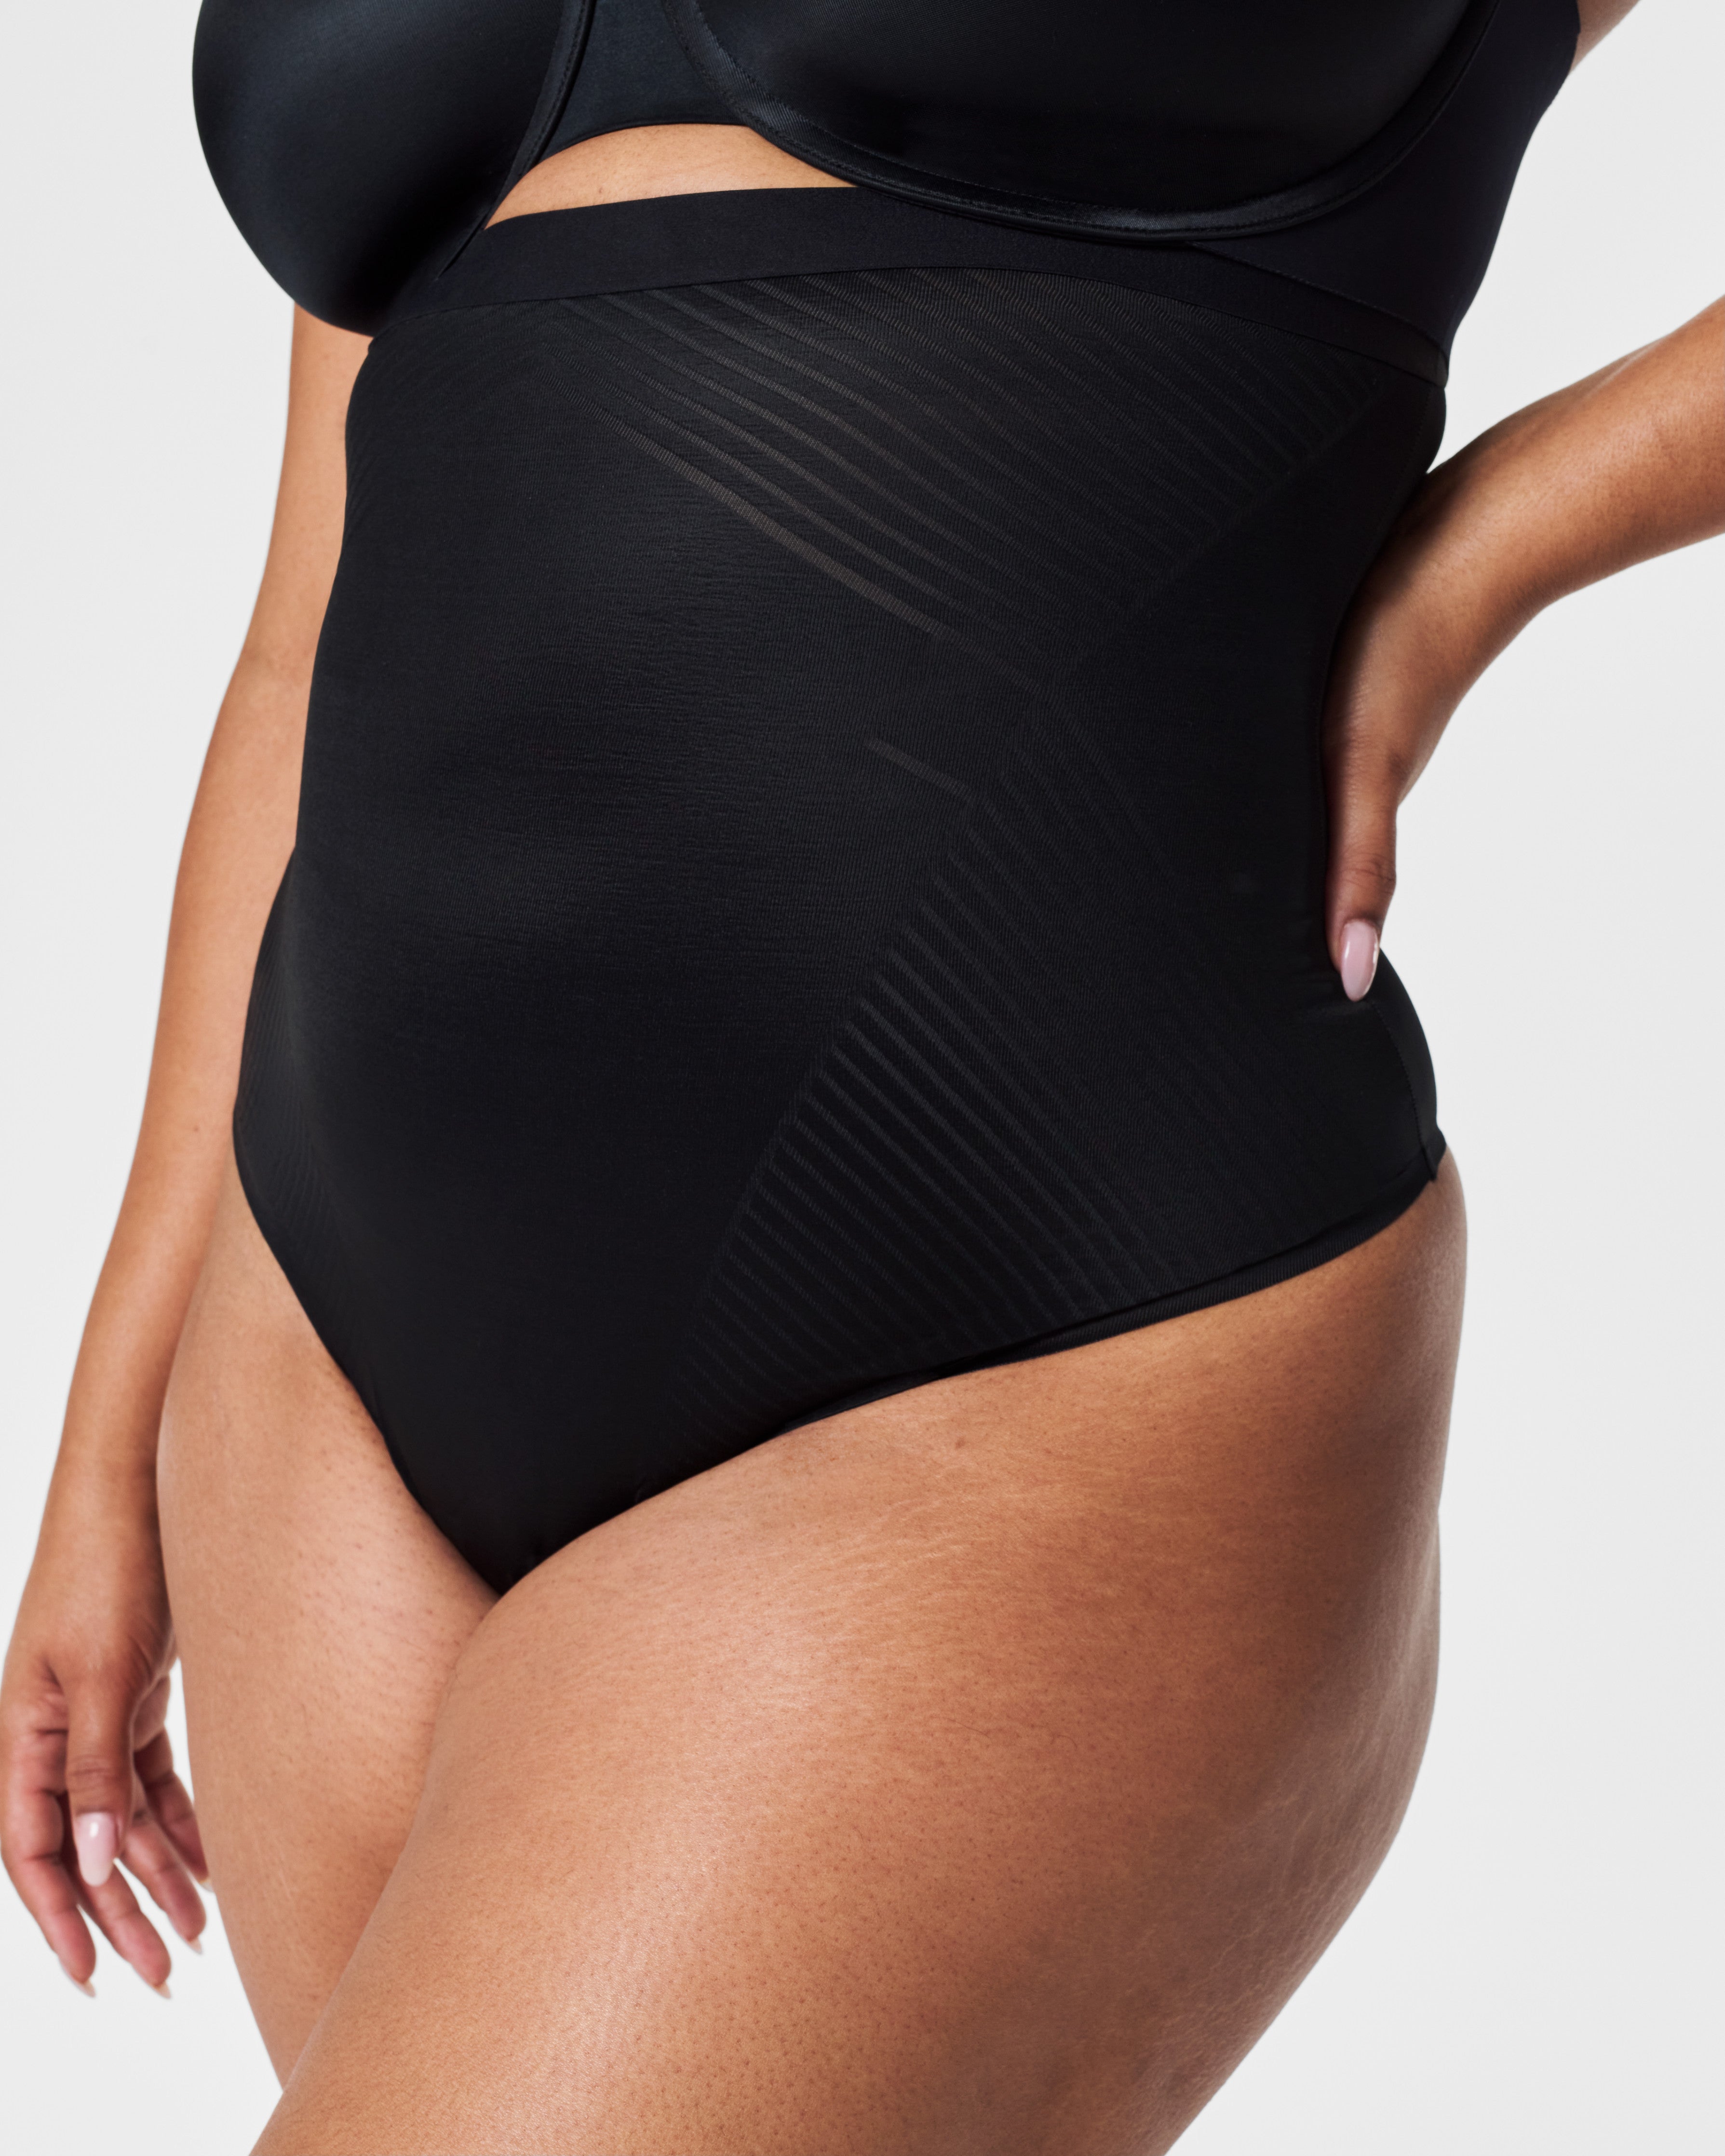 It's our little secret! @Spanx Thinstincts 2.0 features LYCRA® FitSense™  technology for a seamless look and breathable feel. Shop now